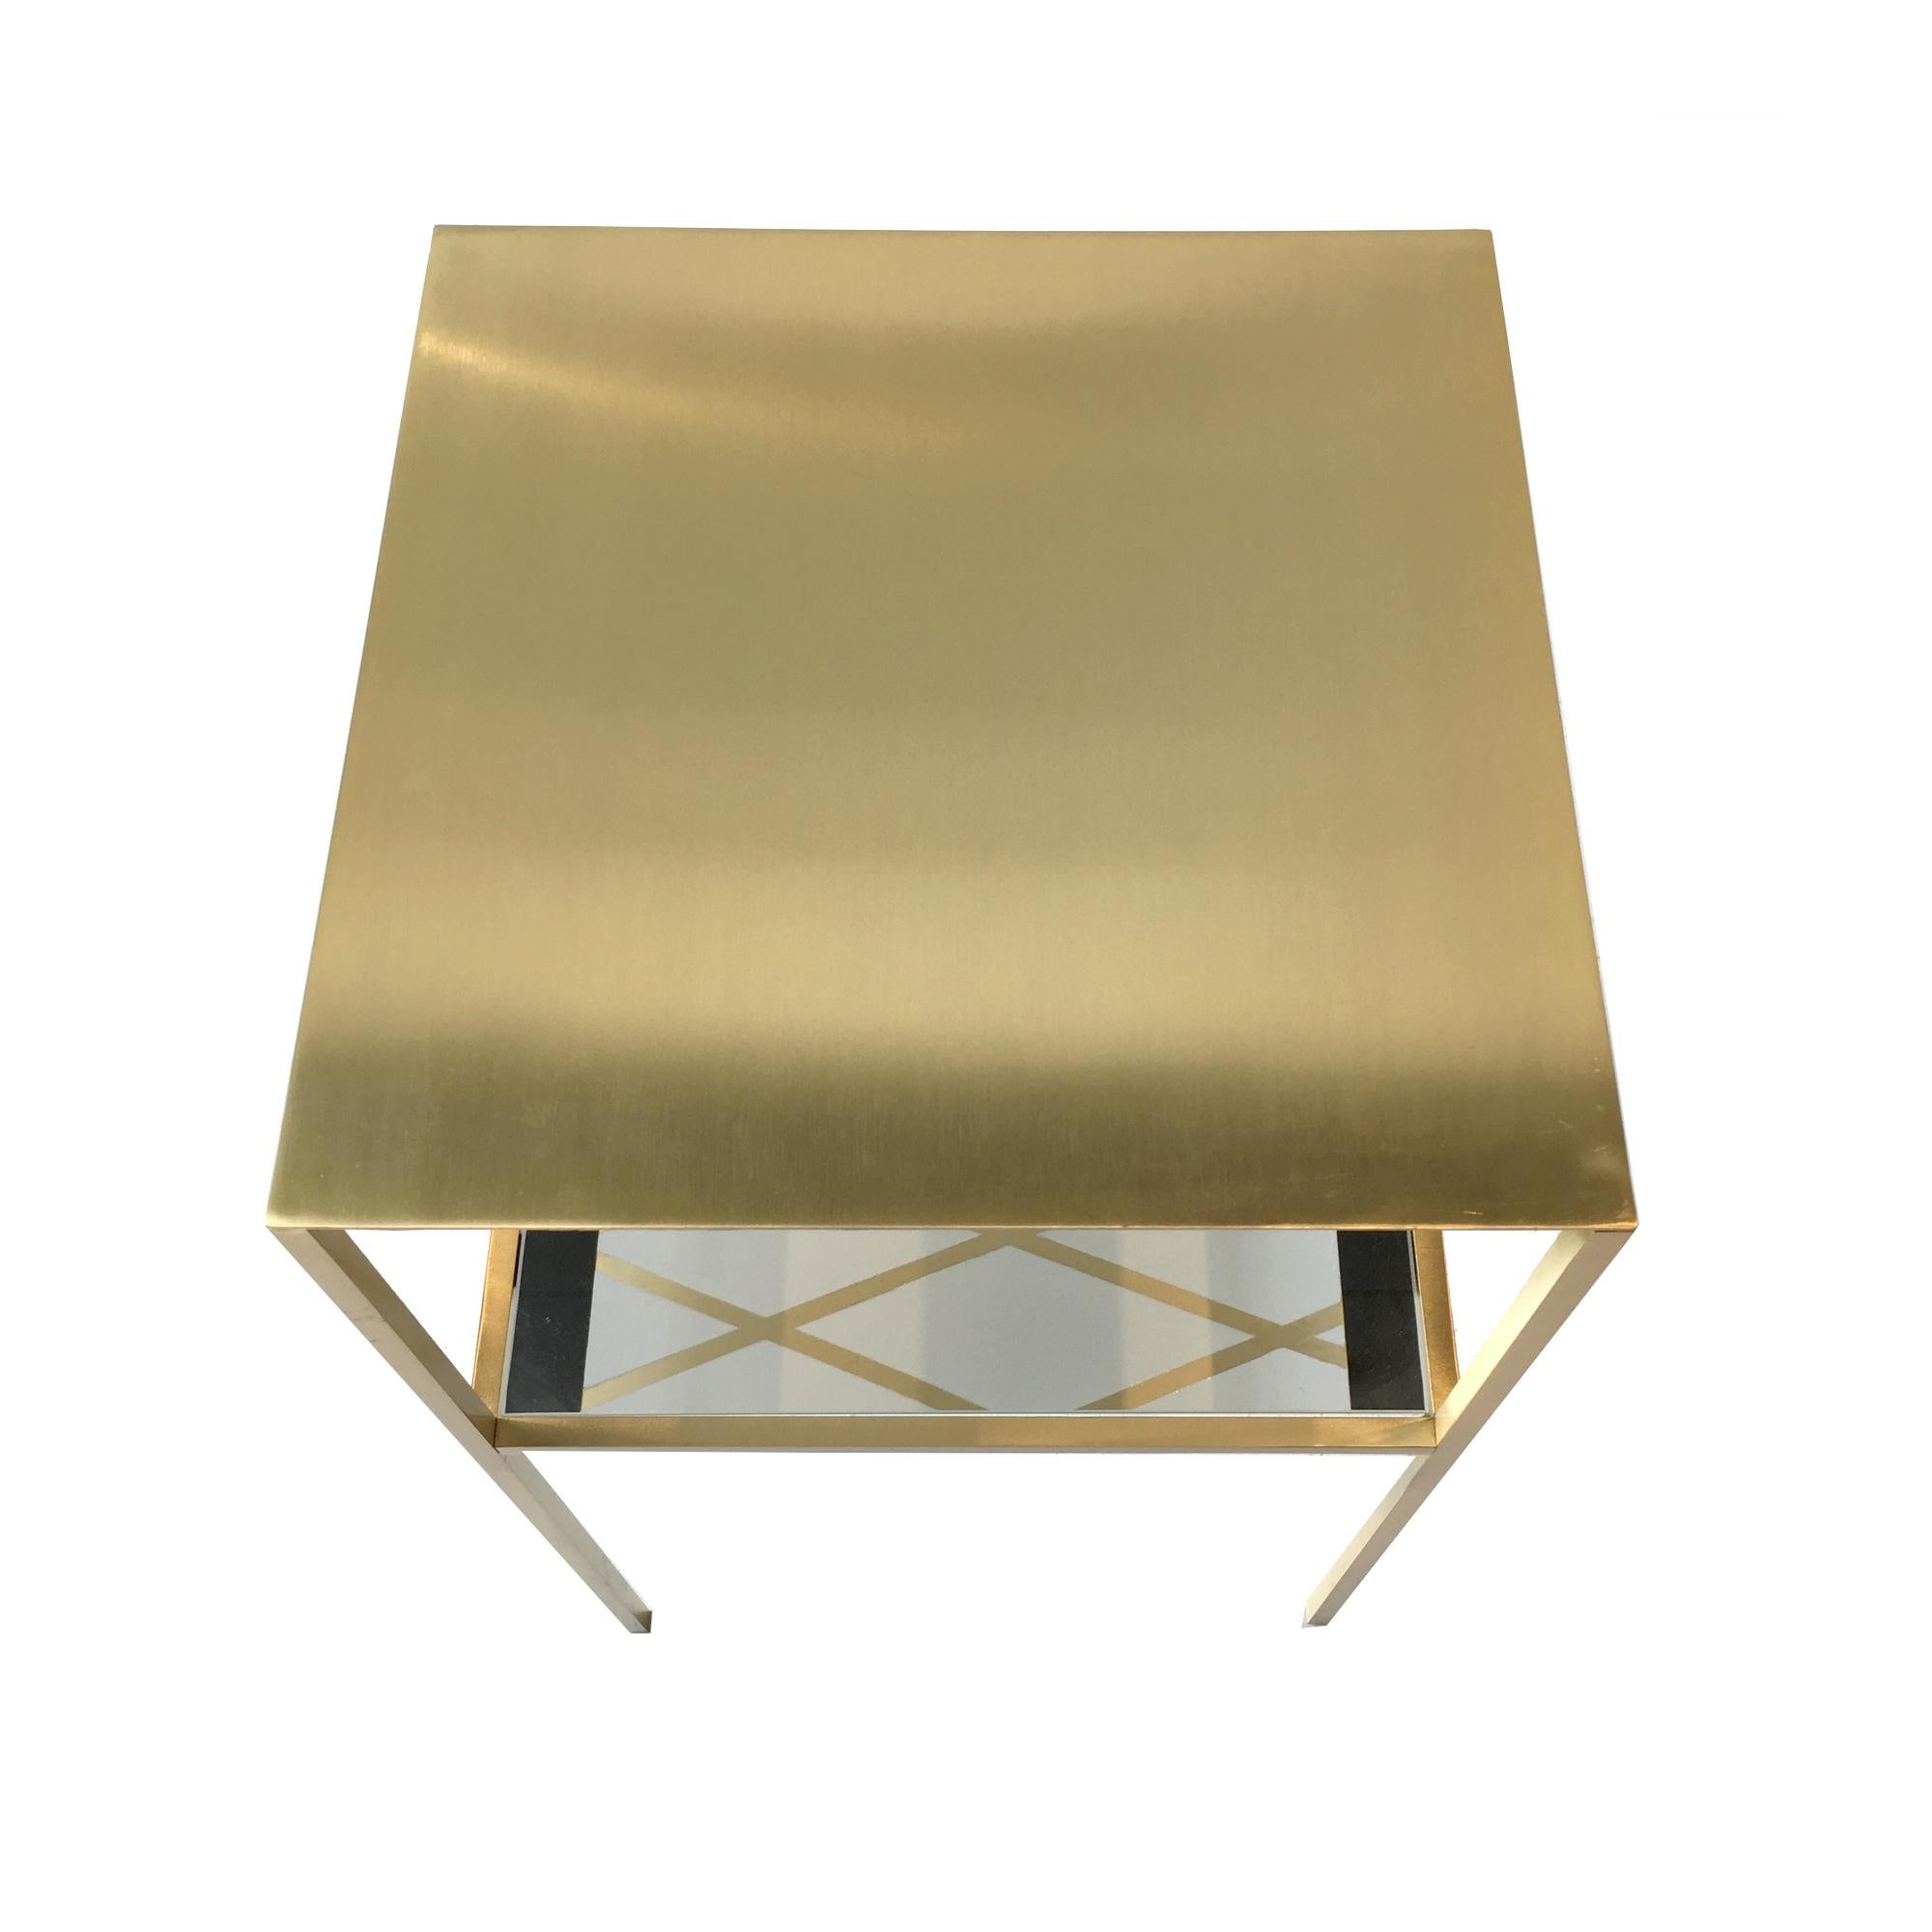 Italian In Stock in Los Angeles, Tabu Square Gold and Brass Coffee Table, Made in Italy For Sale